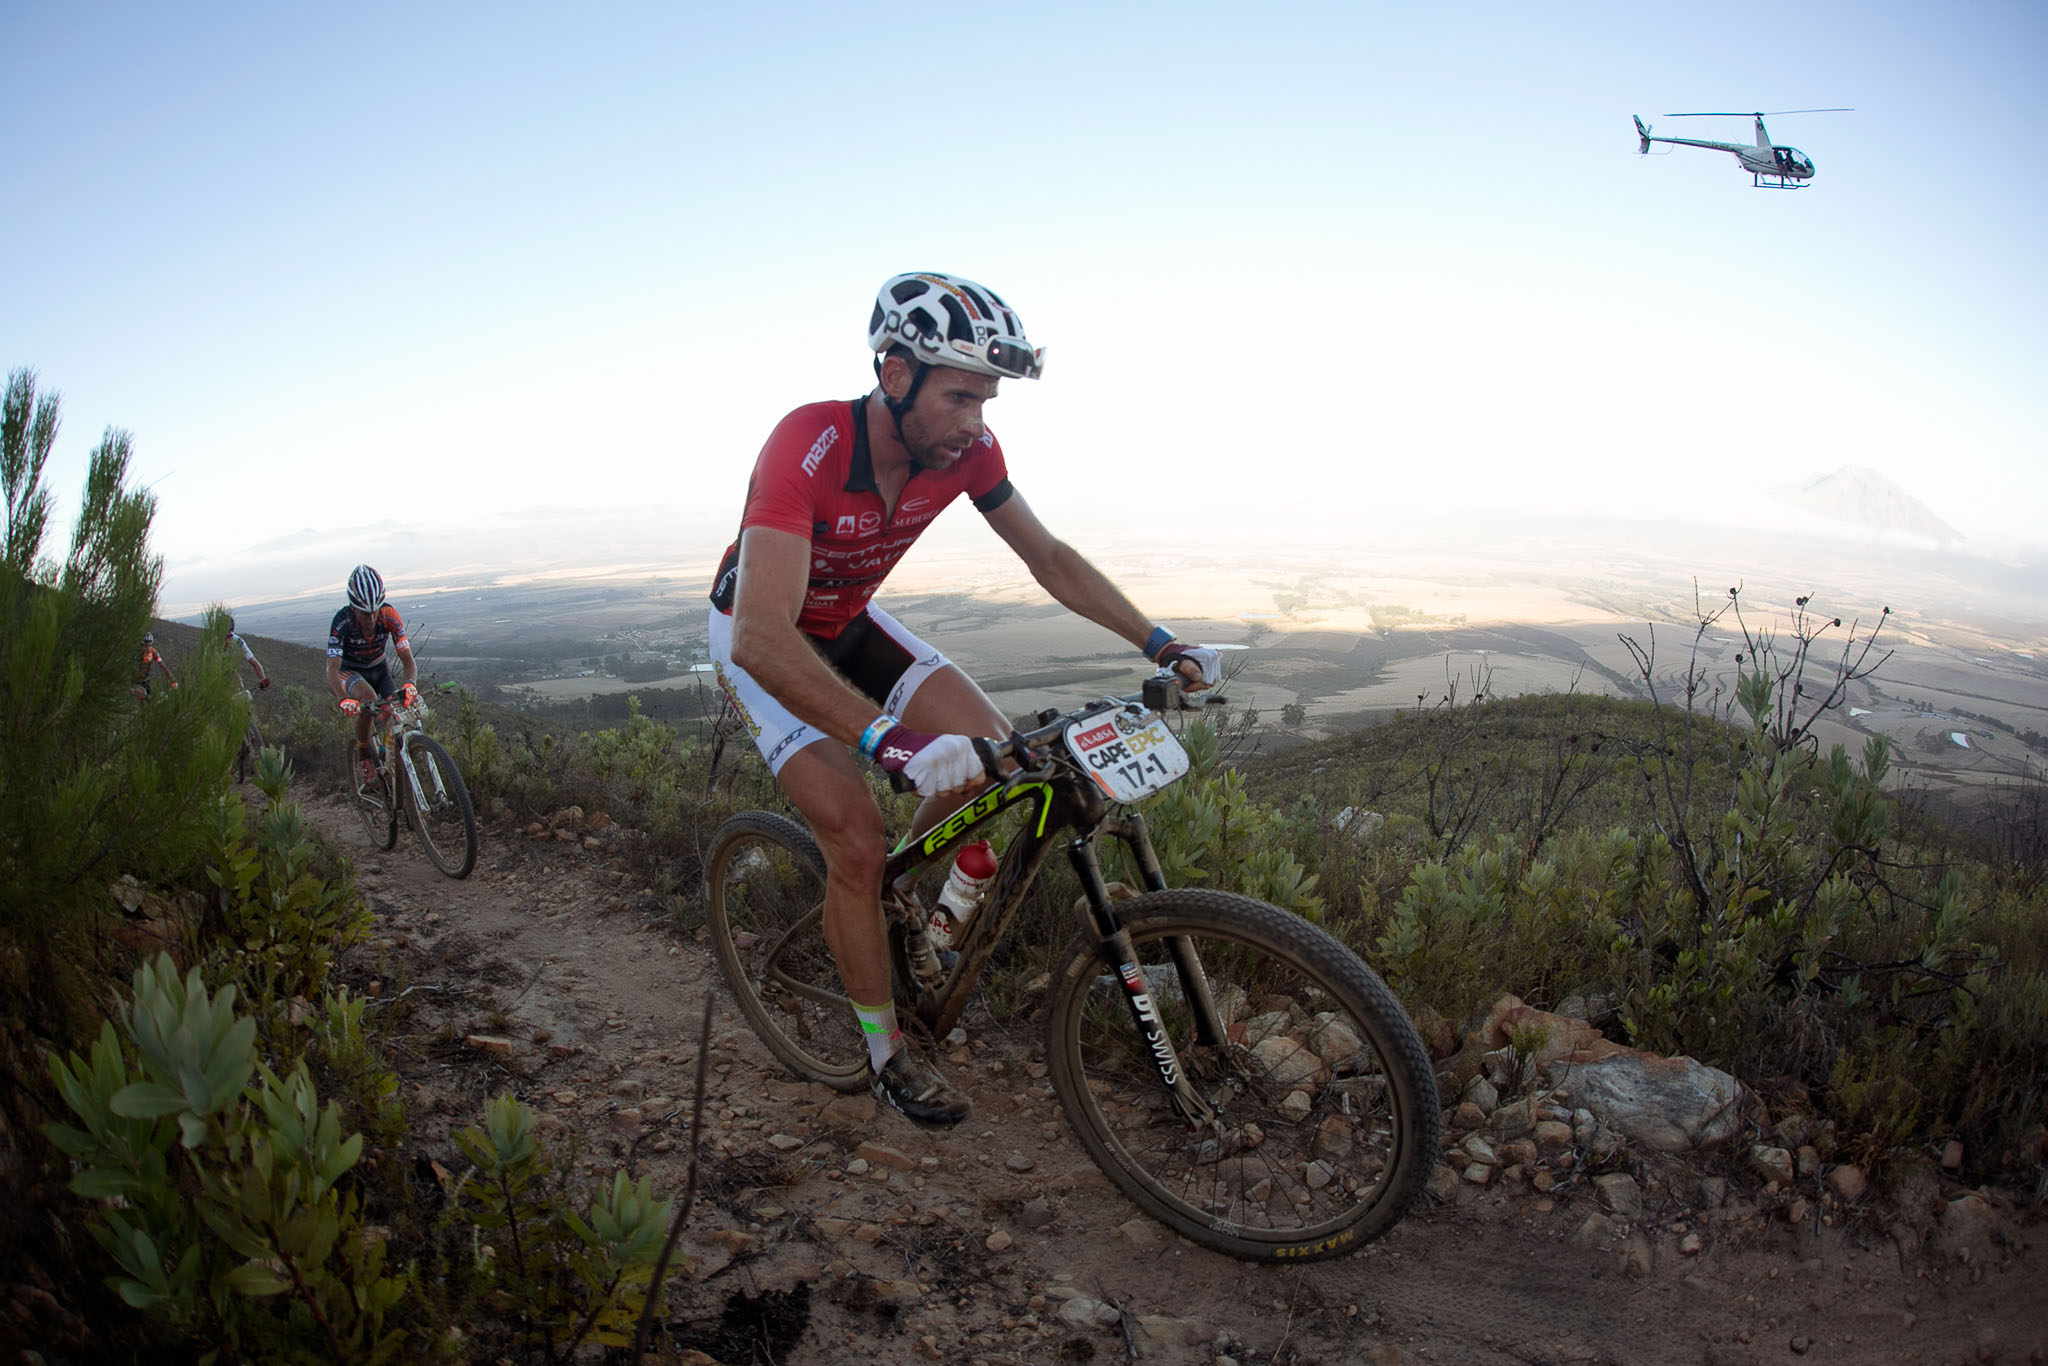 Nicola Rohrbach of team Centurian Vaude by Meerendal 2 pacing himself up the massive climb during stage 2 of the 2016 Absa Cape Epic Mountain Bike stage race from Saronsberg Wine Estate in Tulbagh, South Africa on the 15th March 2016 Photo by Mark Sampson/Cape Epic/SPORTZPICS PLEASE ENSURE THE APPROPRIATE CREDIT IS GIVEN TO THE PHOTOGRAPHER AND SPORTZPICS ALONG WITH THE ABSA CAPE EPIC ace2016